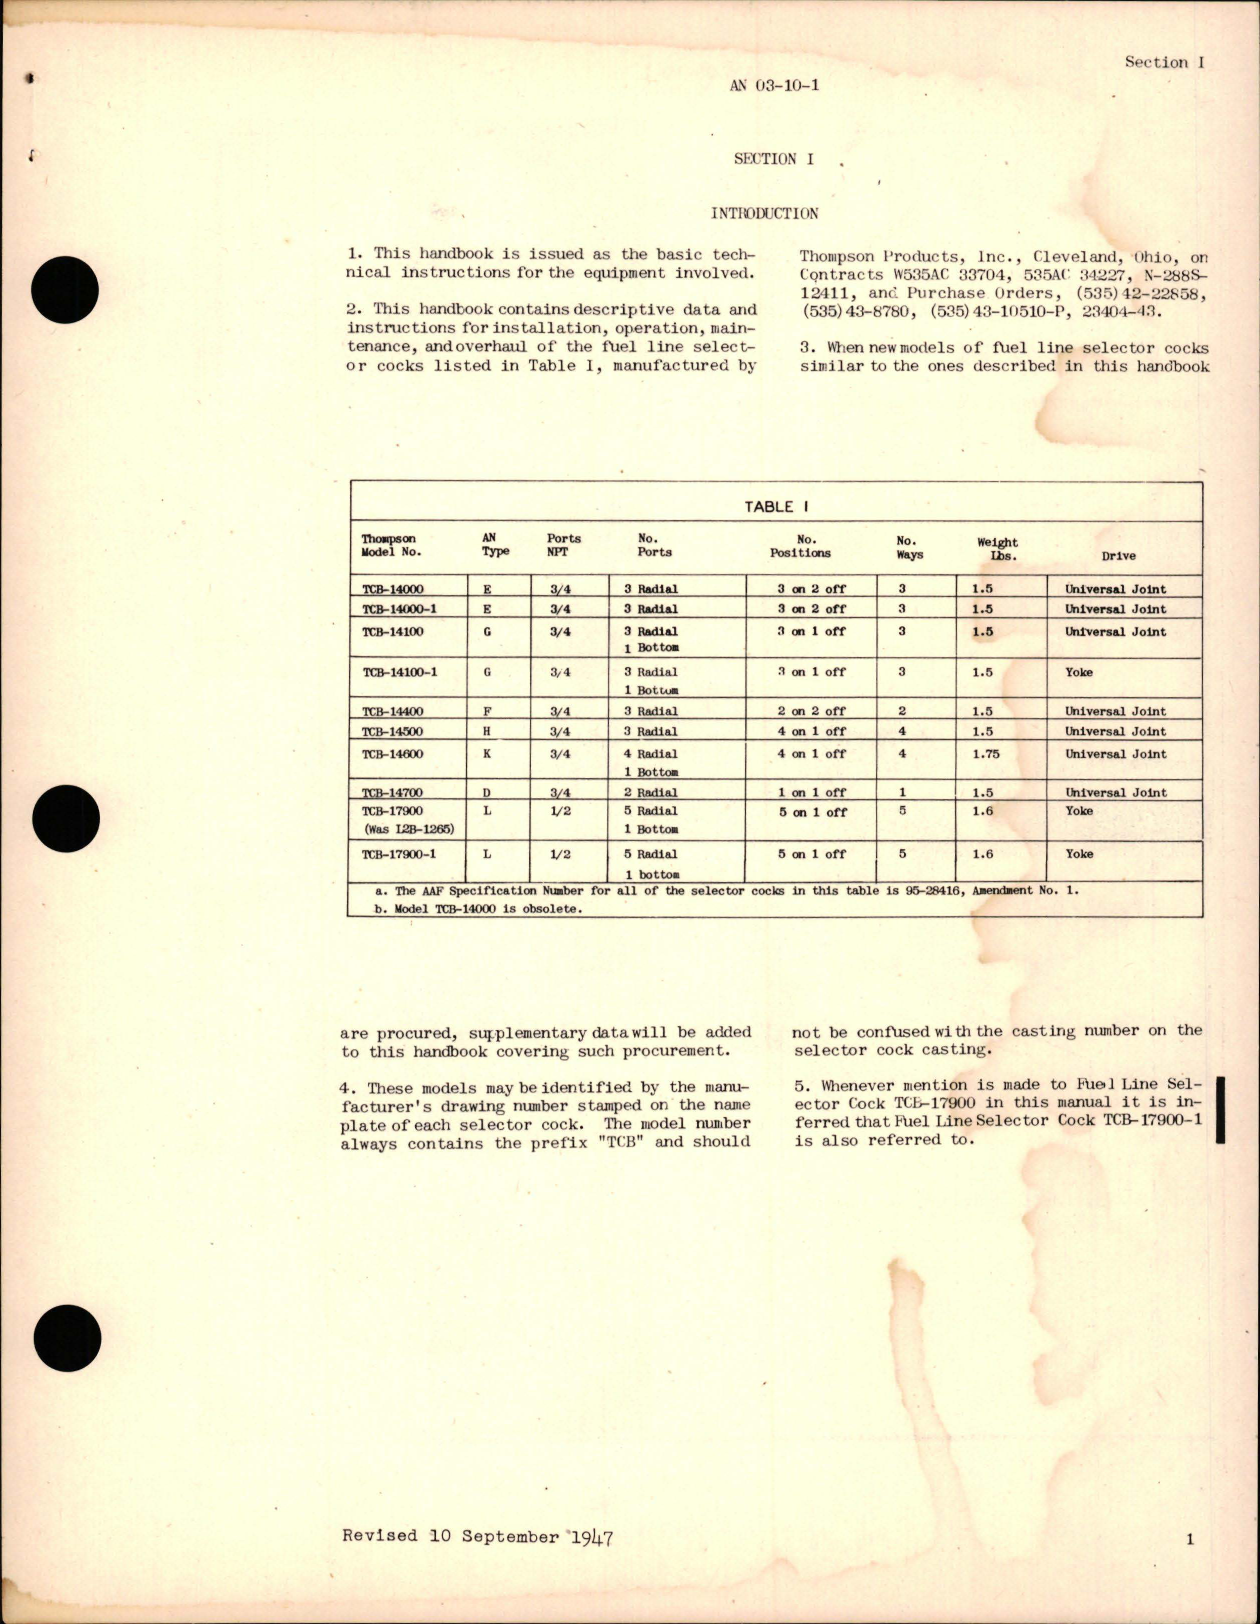 Sample page 5 from AirCorps Library document: Parts Catalog for Fuel Line Selector Cock